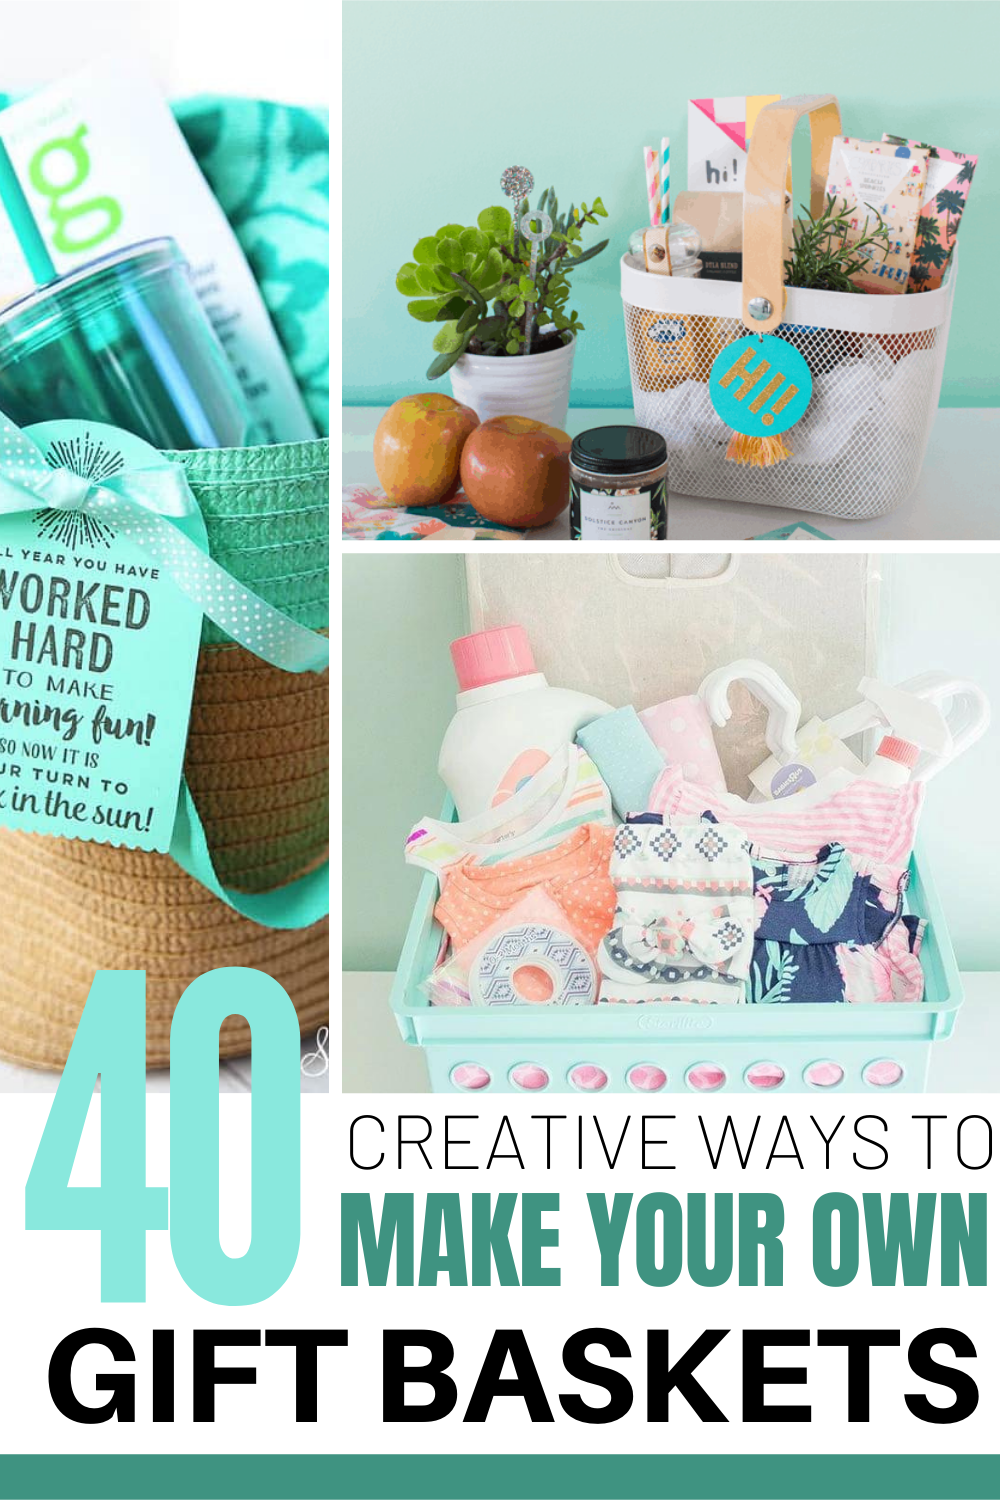 The collage image is titled 40 creative ways to make your own gift baskets. The example images include a basket for a teacher, a box for a new baby and a basket full of seeds for the plant lover